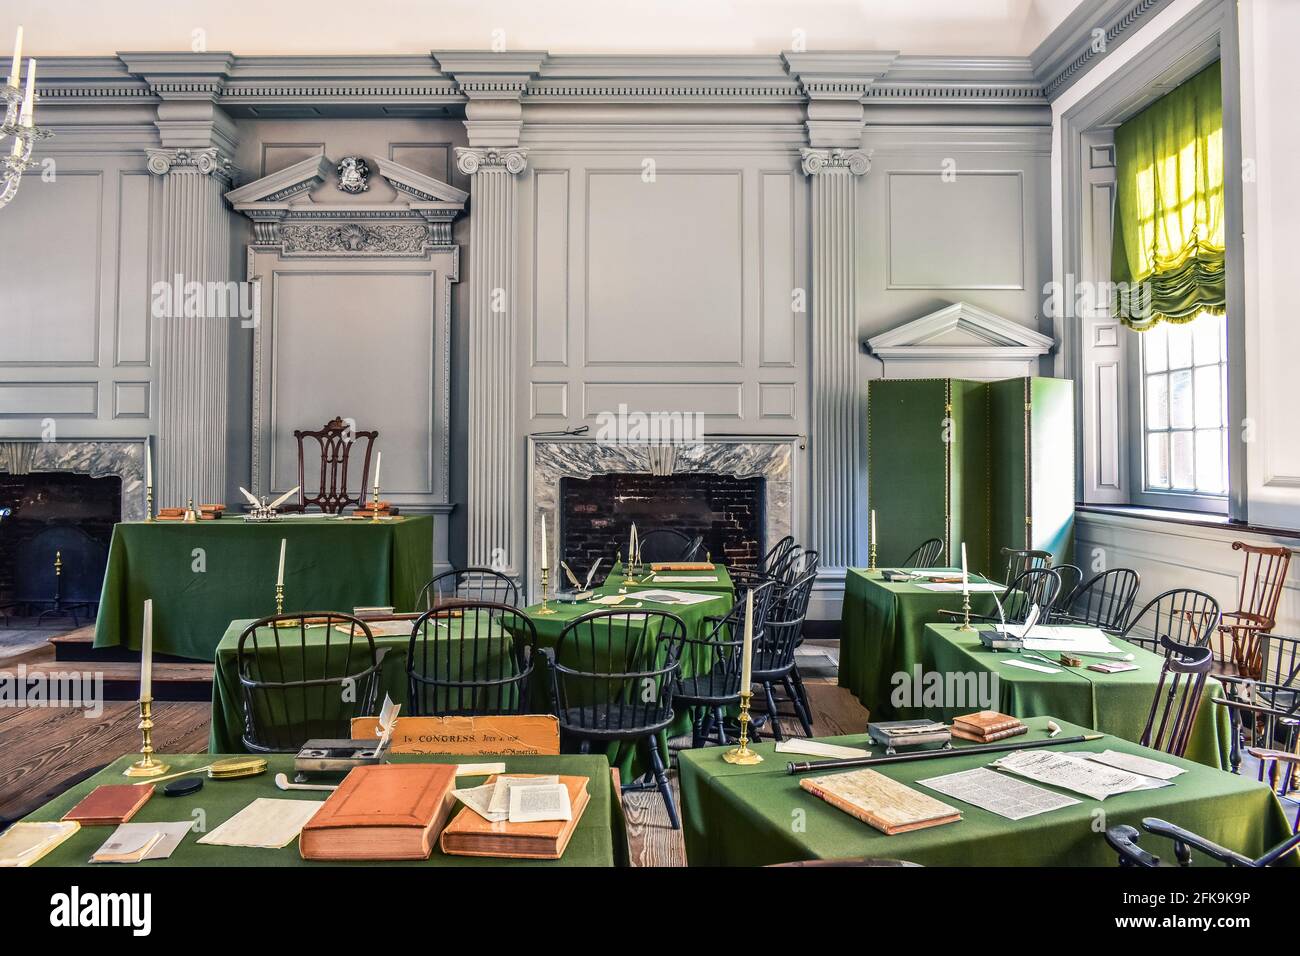 Historic Assembly Room in Independence Hall, Philadelphia, Pennsylvania, United States of America. 03 Stock Photo